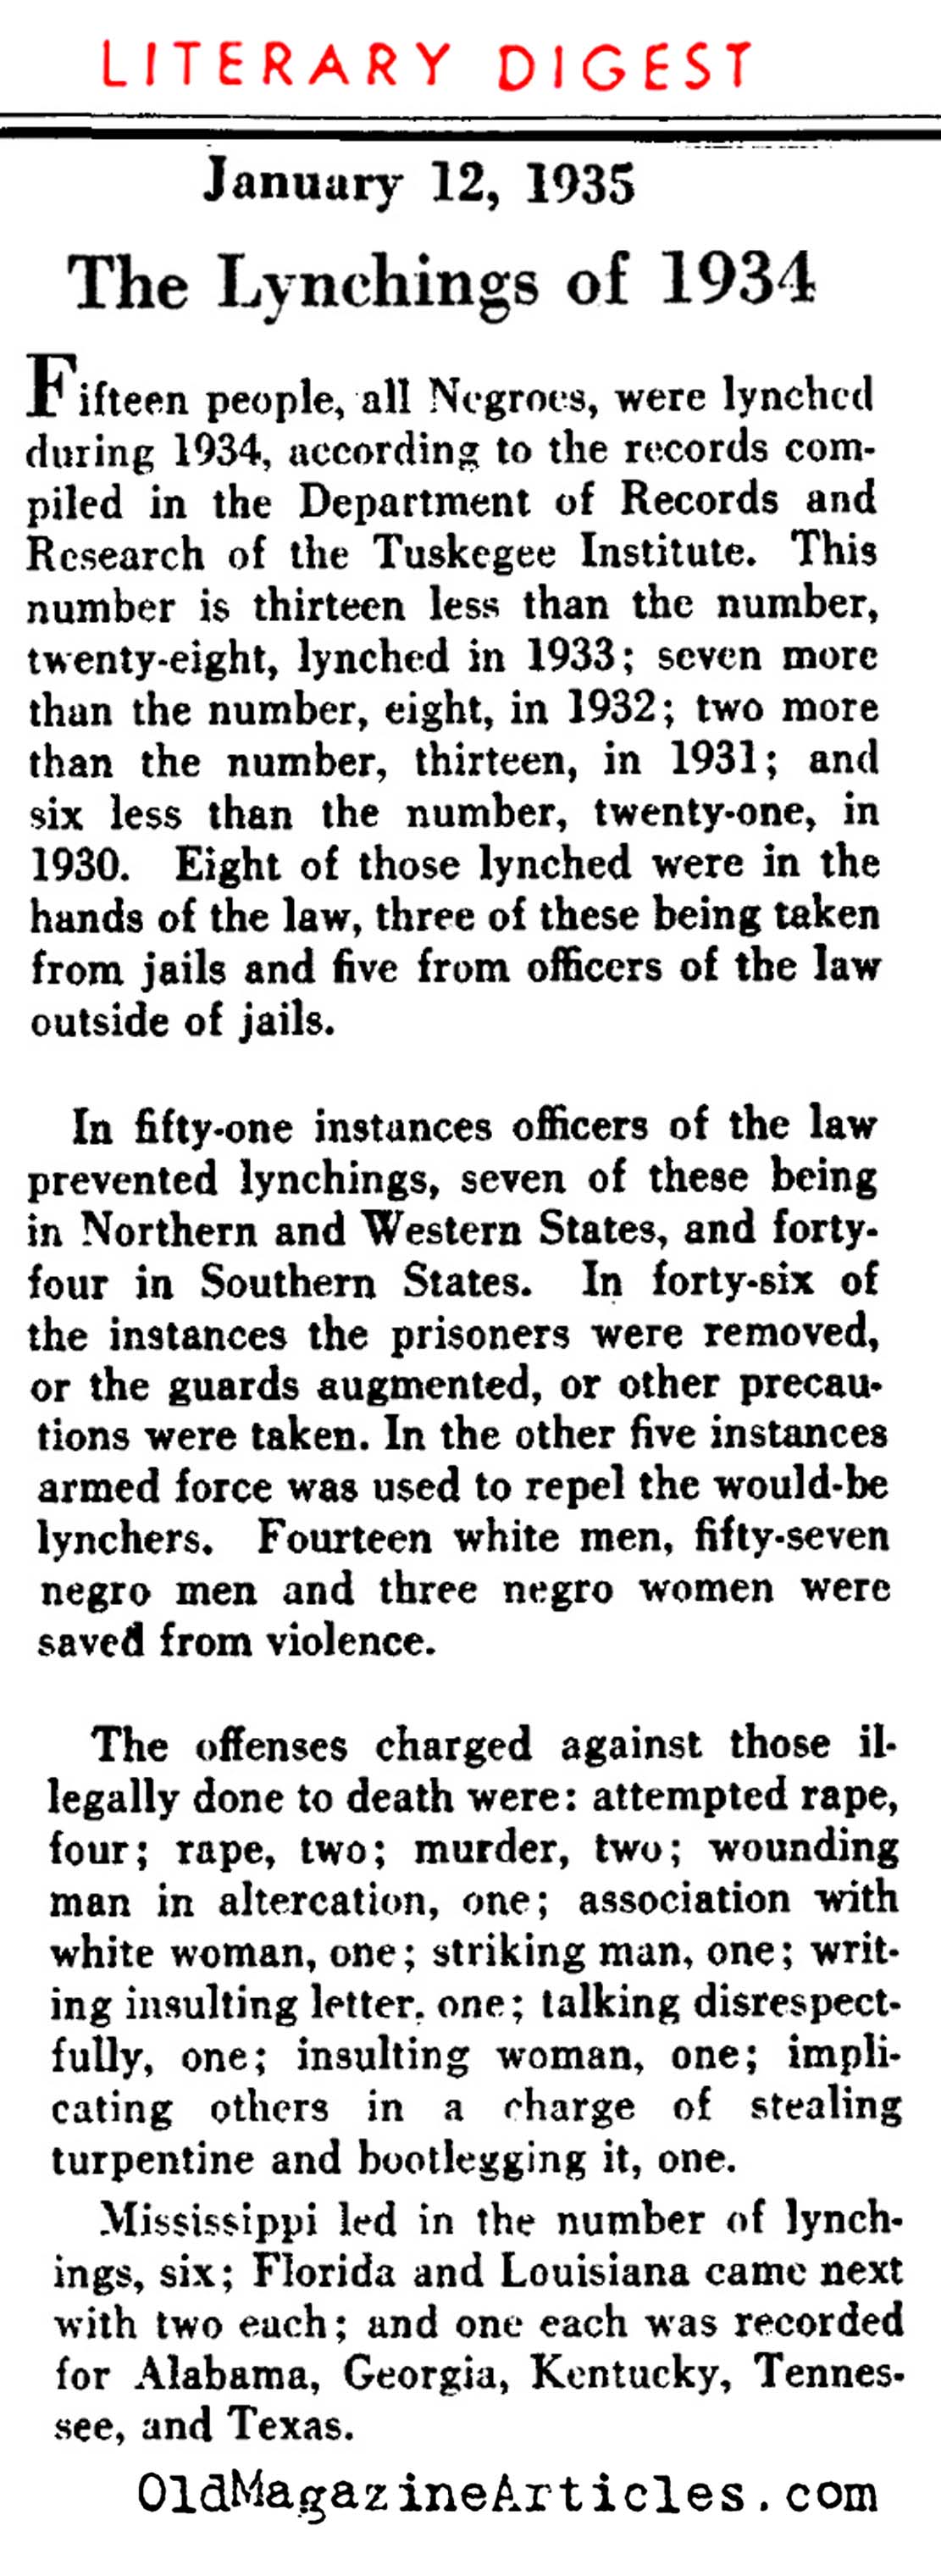 The Lynchings of 1934 (Literary Digest, 1935)